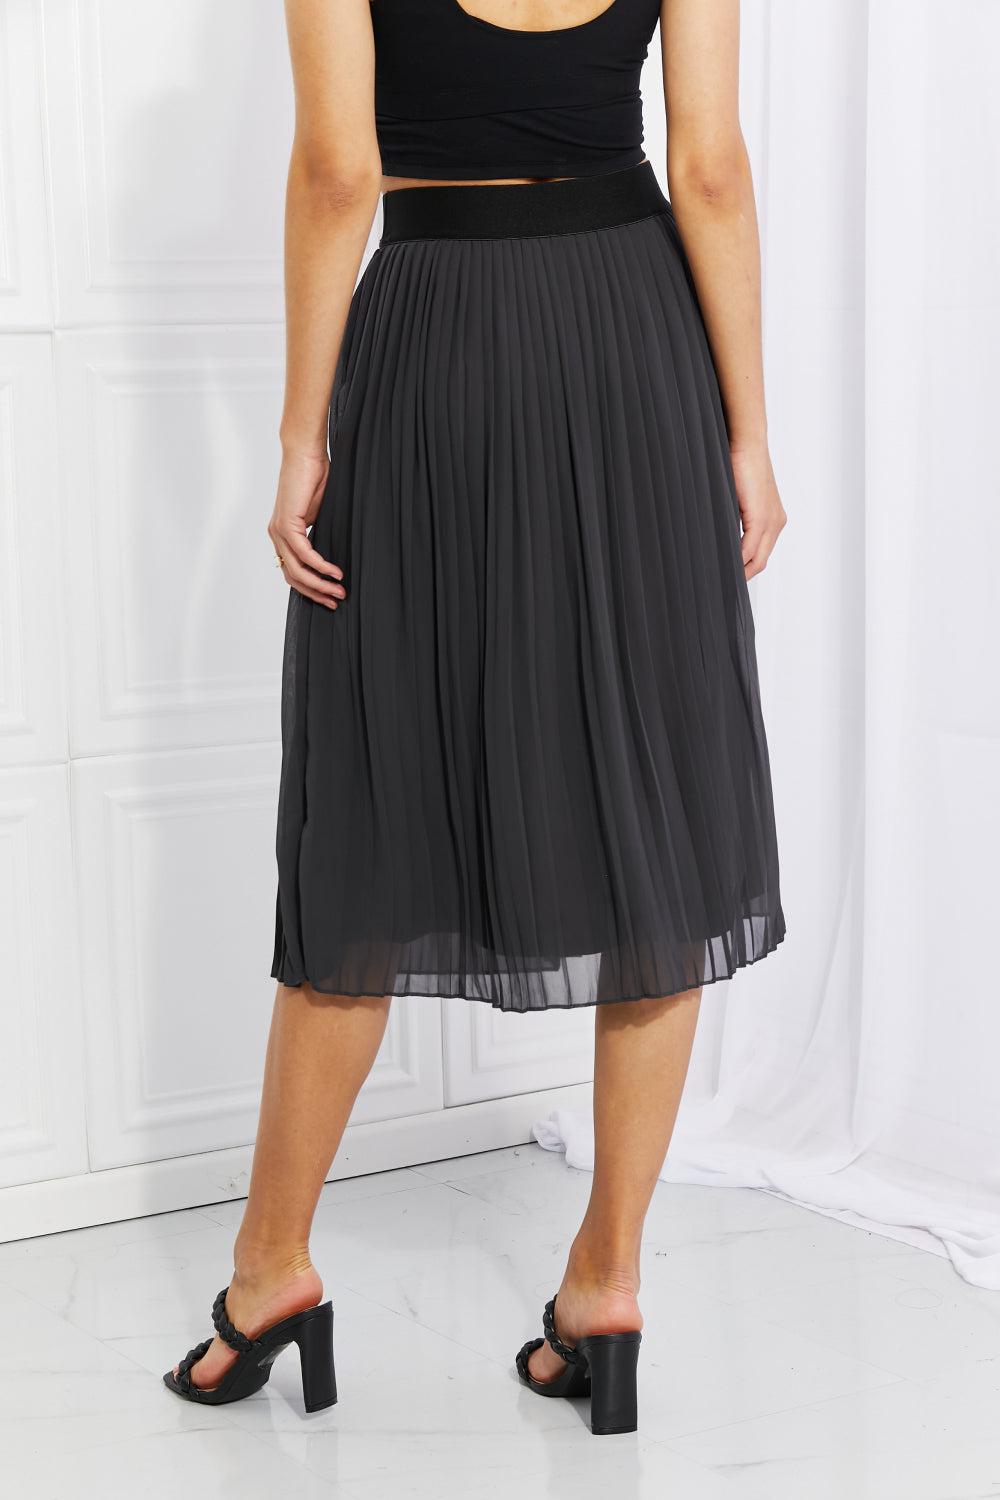 Romantic At Heart Pleated Chiffon Midi Skirt-Black Friday, Ship from USA, Zenana-Dark Gray-S-[option4]-[option5]-[option6]-Womens-USA-Clothing-Boutique-Shop-Online-Clothes Minded